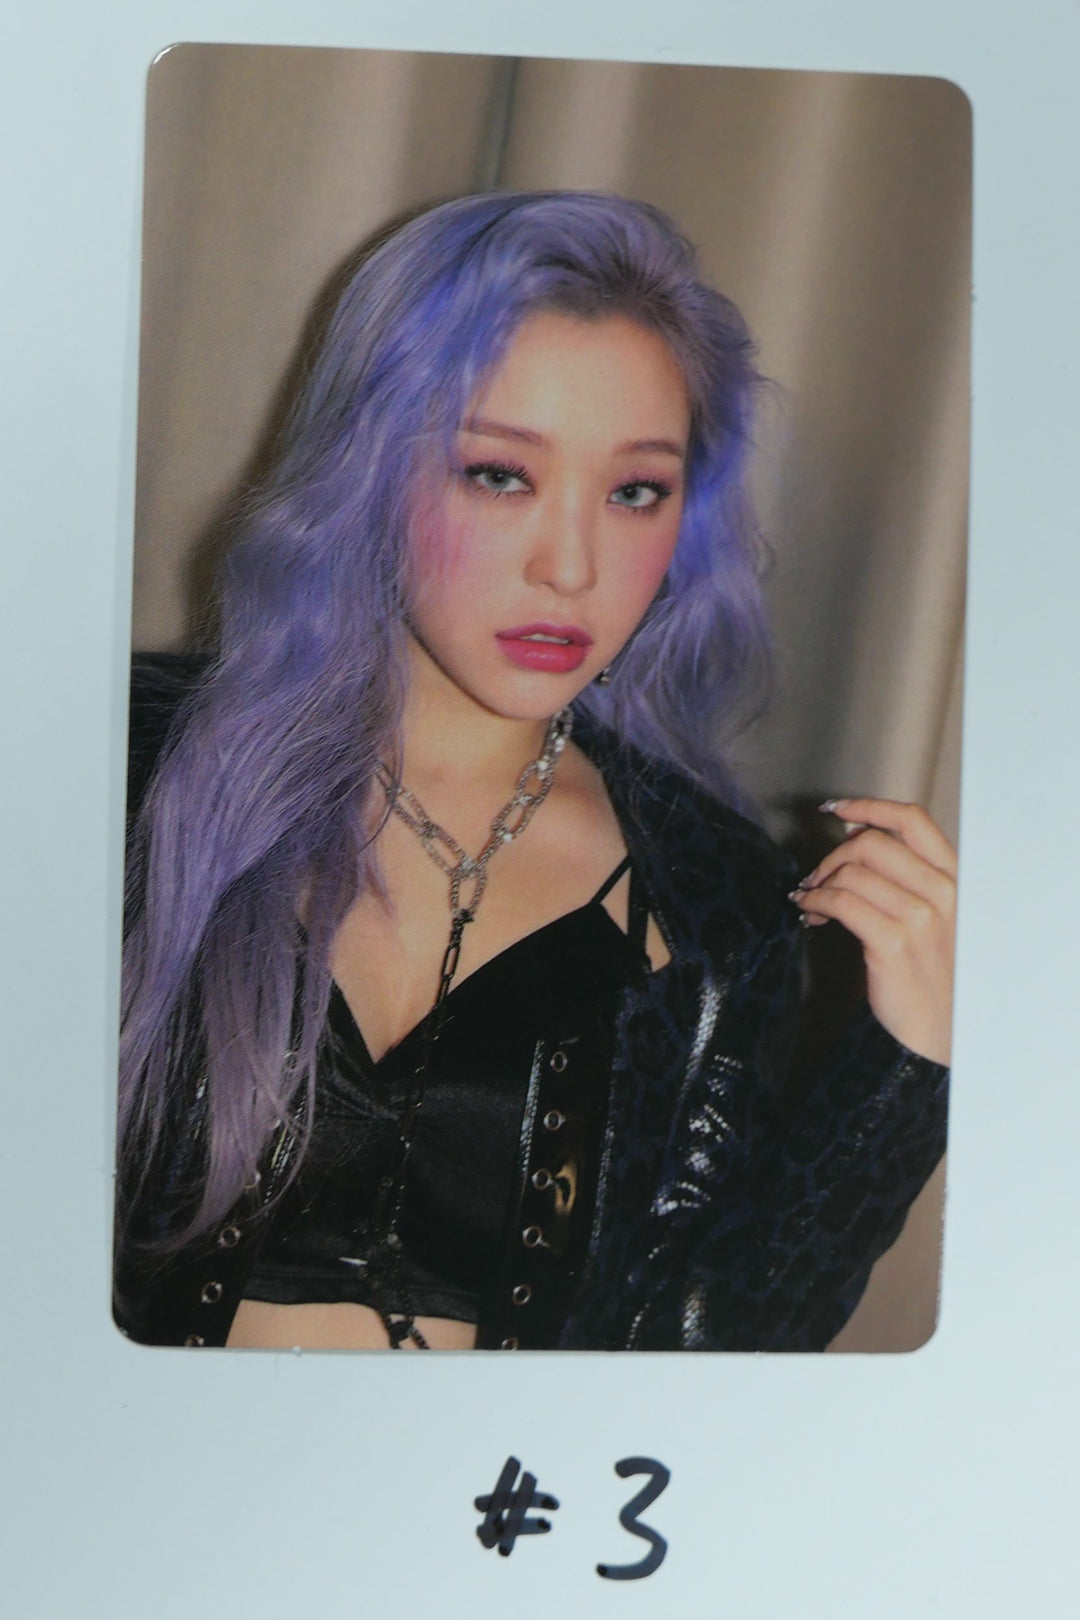 Dreamcatcher "Road To Utopia" - Gahyeon Official Photocard